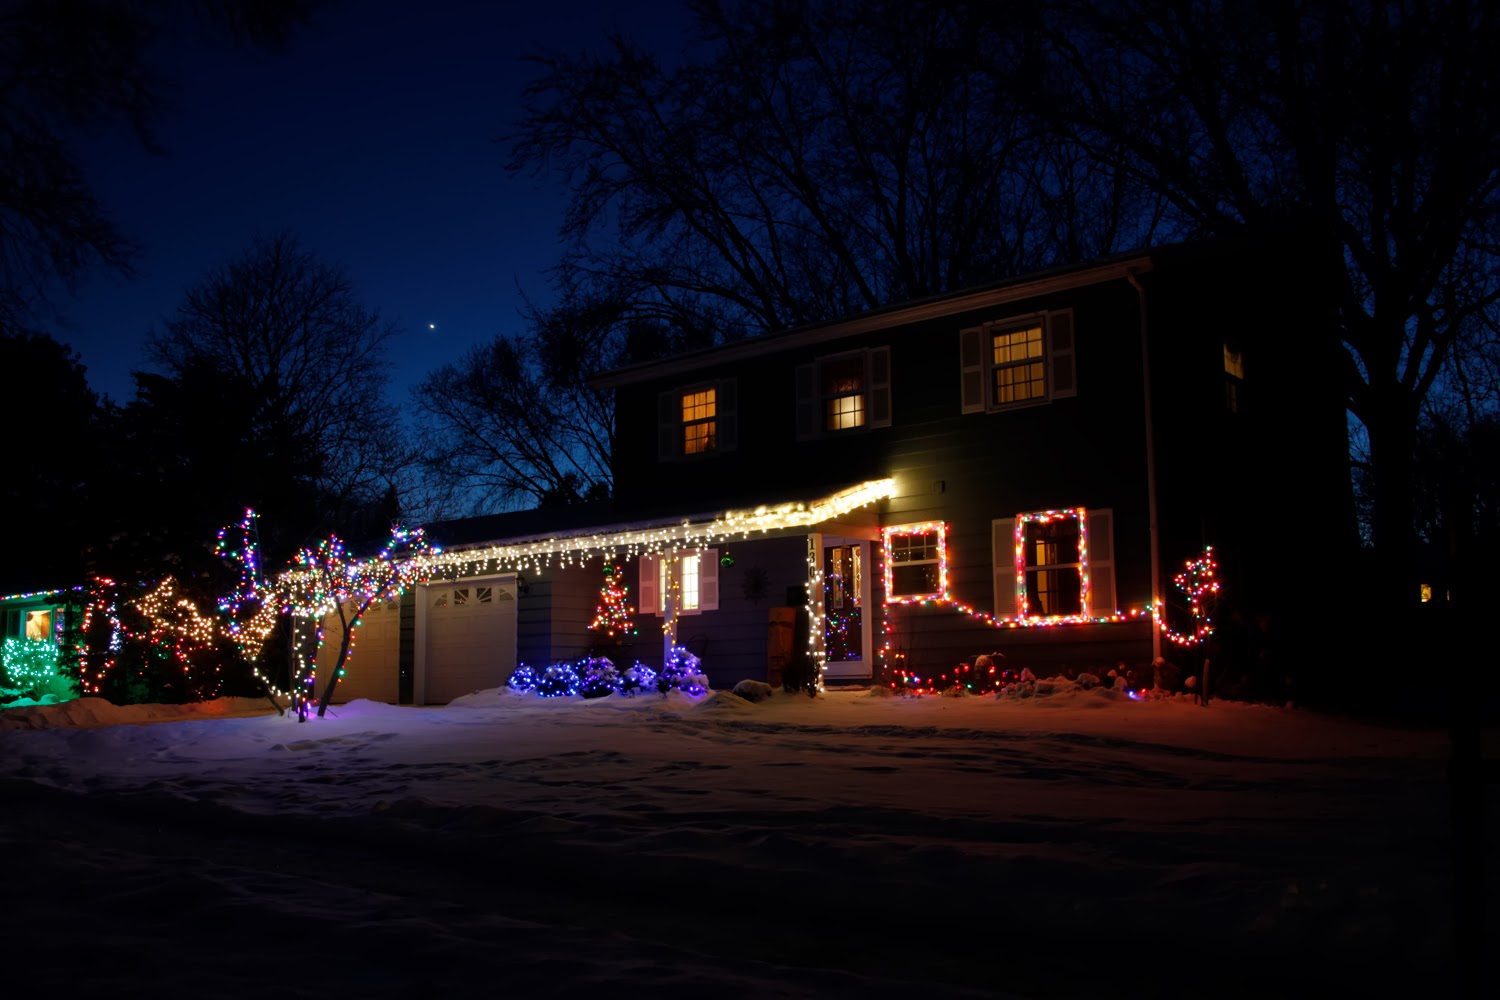 holiday lights, Christmas lights, photography, how to, blue hour